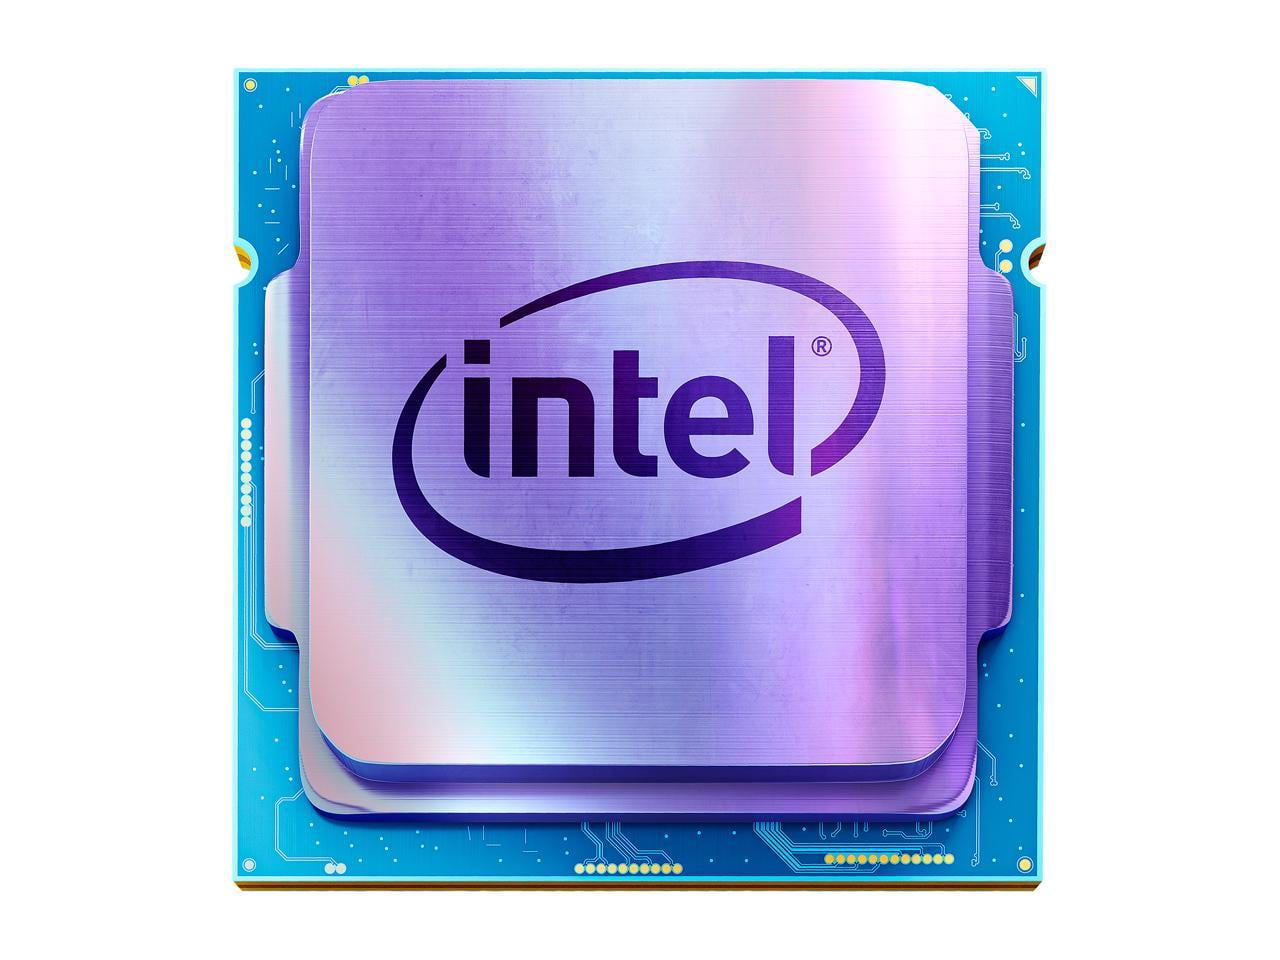 Intel Core i5-10400 \ Intel UHD Graphics 630 \ 19 GAMES TESTED IN 07/2022  (16GB RAM) 